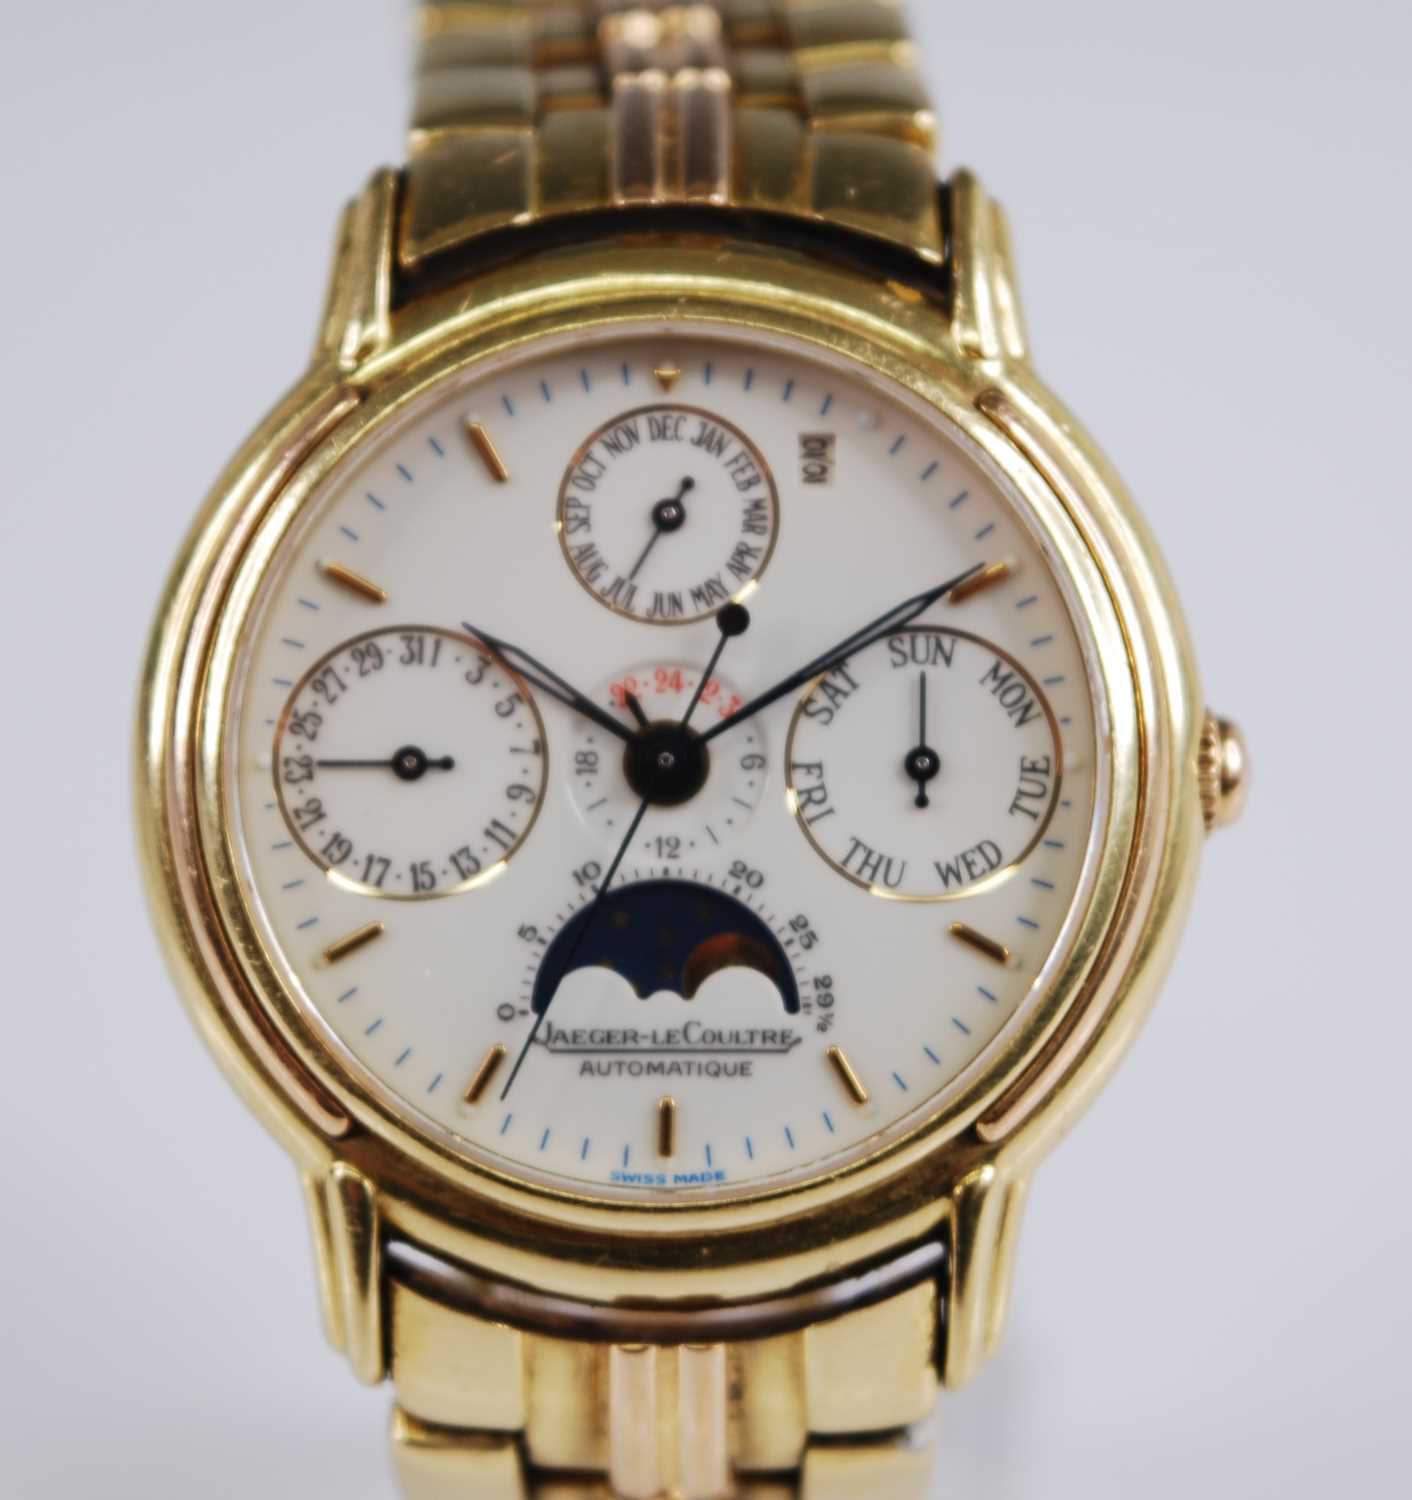 A gent's Jaeger LeCoultre 18ct gold cased Odysseus perpetual calendar watch, ref: 166.7.80, No. - Image 2 of 11